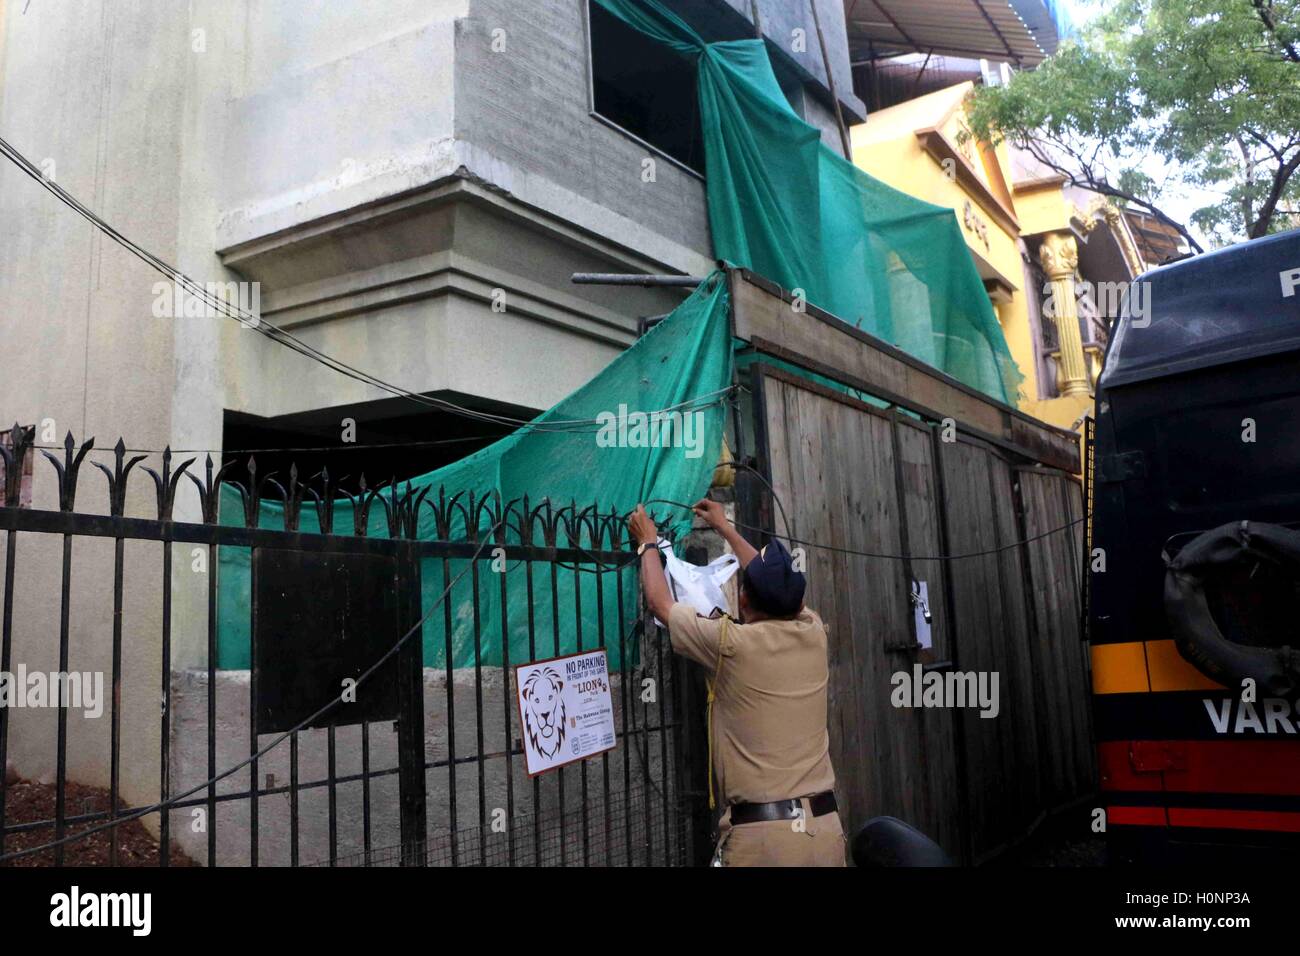 Police security being beefed up outside stand-up comedian Kapil Sharma's office in Versova Mumbai India on September 12, 2016 Stock Photo